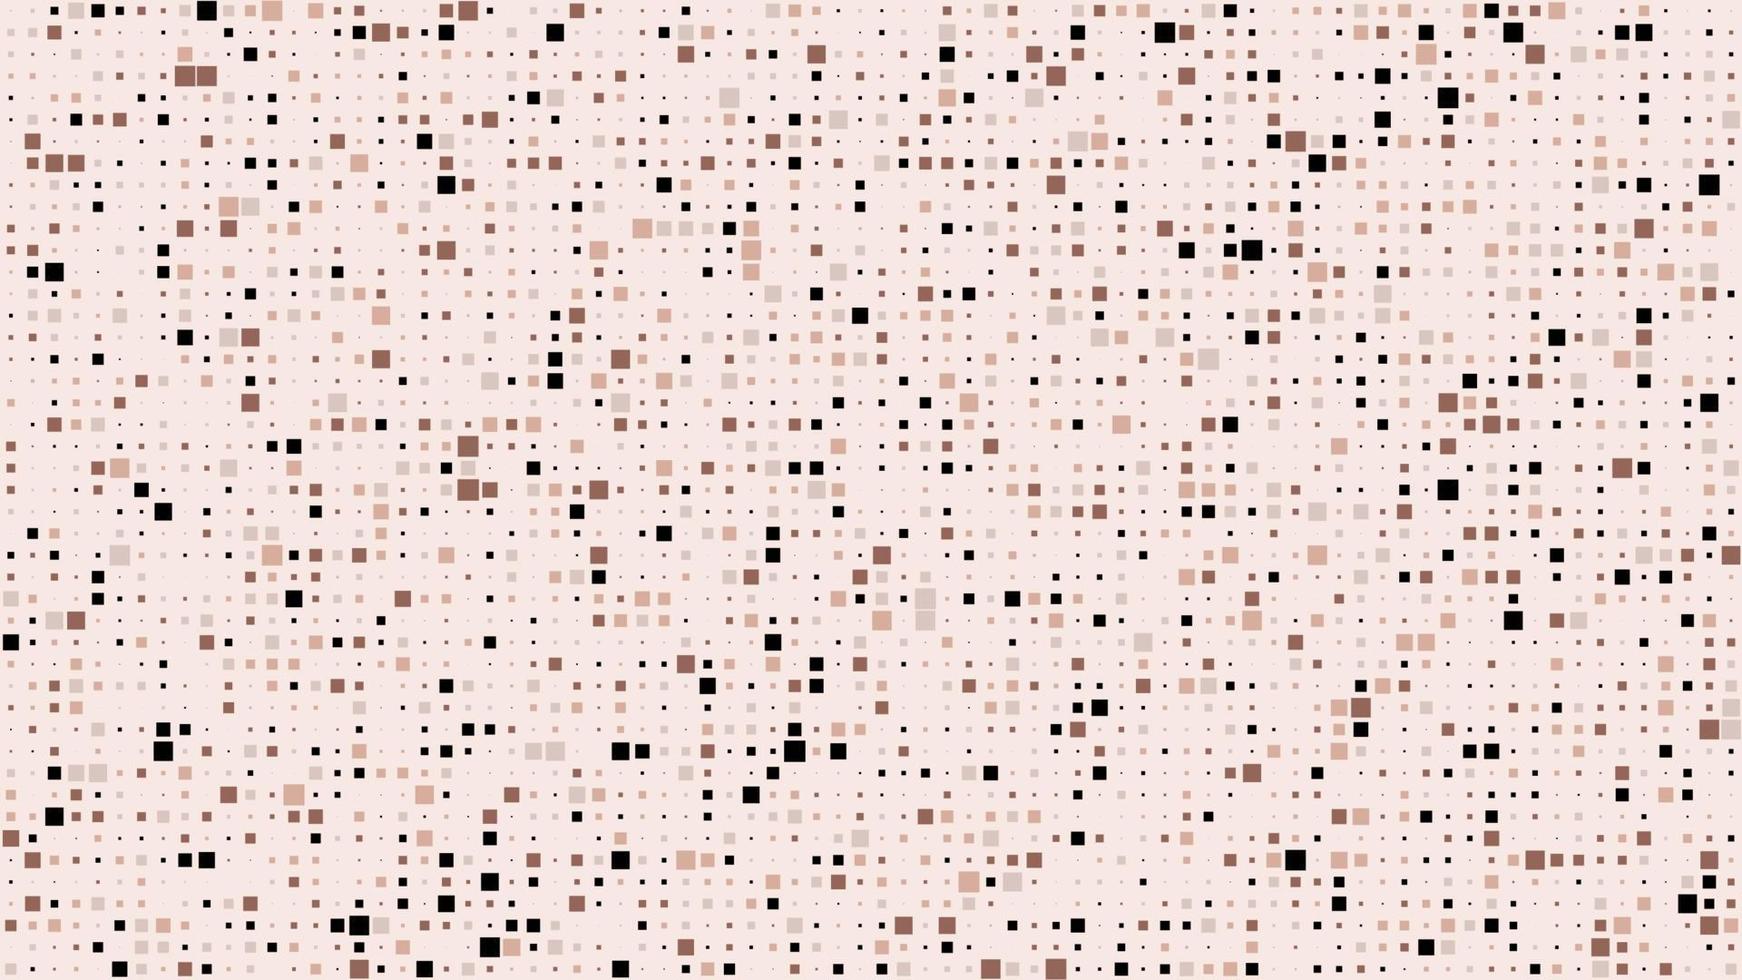 Abstract geometric background of squares. Brown pixel background with empty space. Vector illustration.